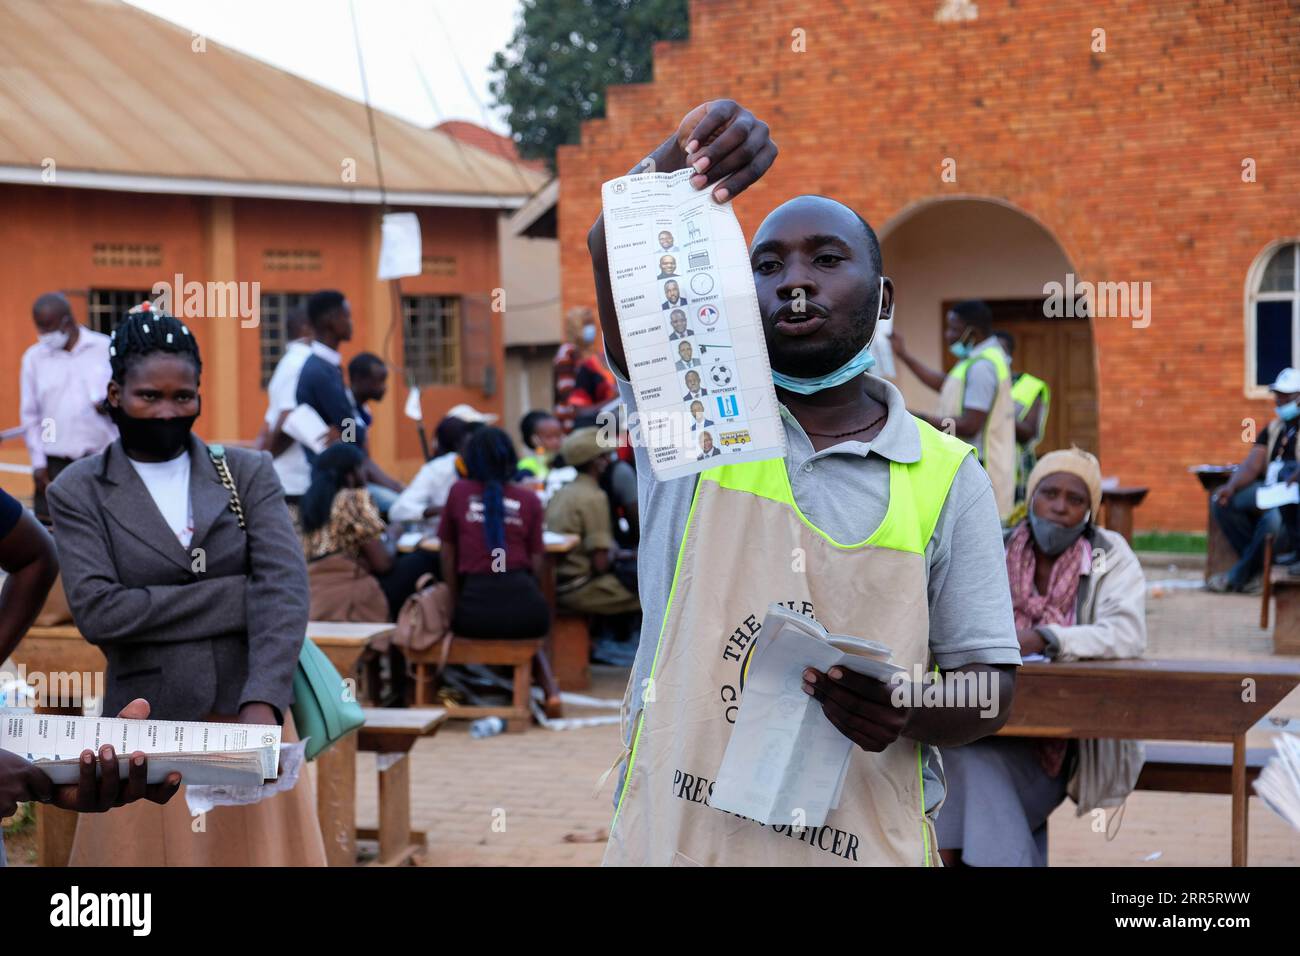 210114 -- NAJJERA UGANDA, Jan. 14, 2021 -- A staff member displays a ballot at a polling station in Najjera, Wakiso District, Uganda, on Jan. 14, 2021. Vote counting in Uganda s Thursday presidential and parliamentary elections has started with the country s electoral body saying results are expected to be released in 48 hours. Photo by /Xinhua UGANDA-NAJJERA-GENERAL ELECTIONS-VOTE COUNTING HajarahxNalwadda PUBLICATIONxNOTxINxCHN Stock Photo